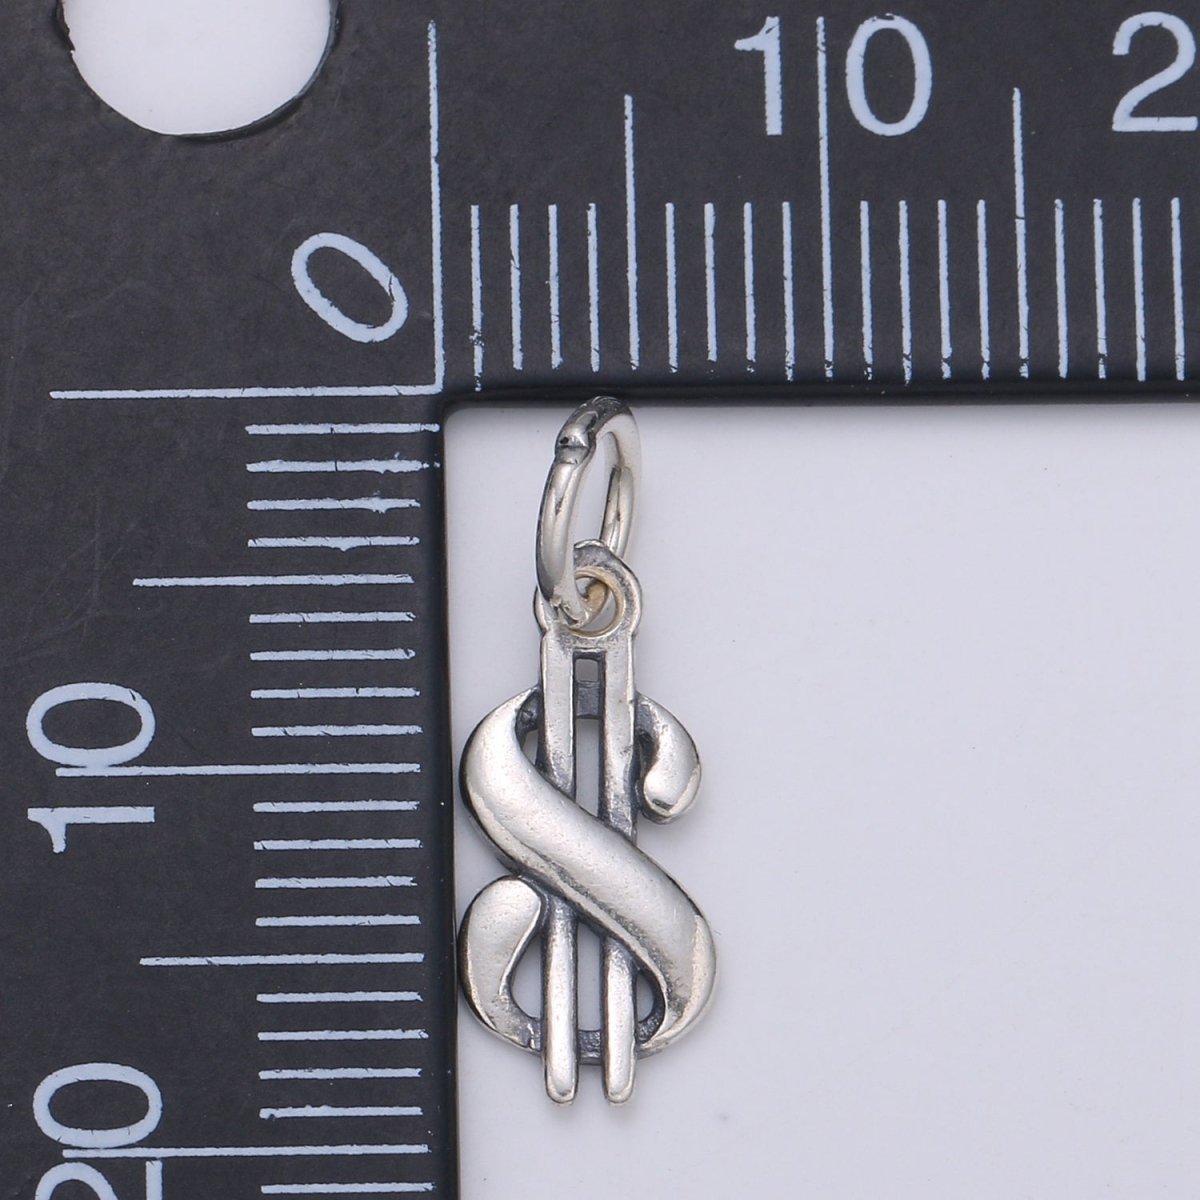 925 Sterling Silver Dollar Sign Charm, Money Charm Silver Dollar Charm for Necklace Bracelet Earring, KaChing Charm SL-150 - DLUXCA